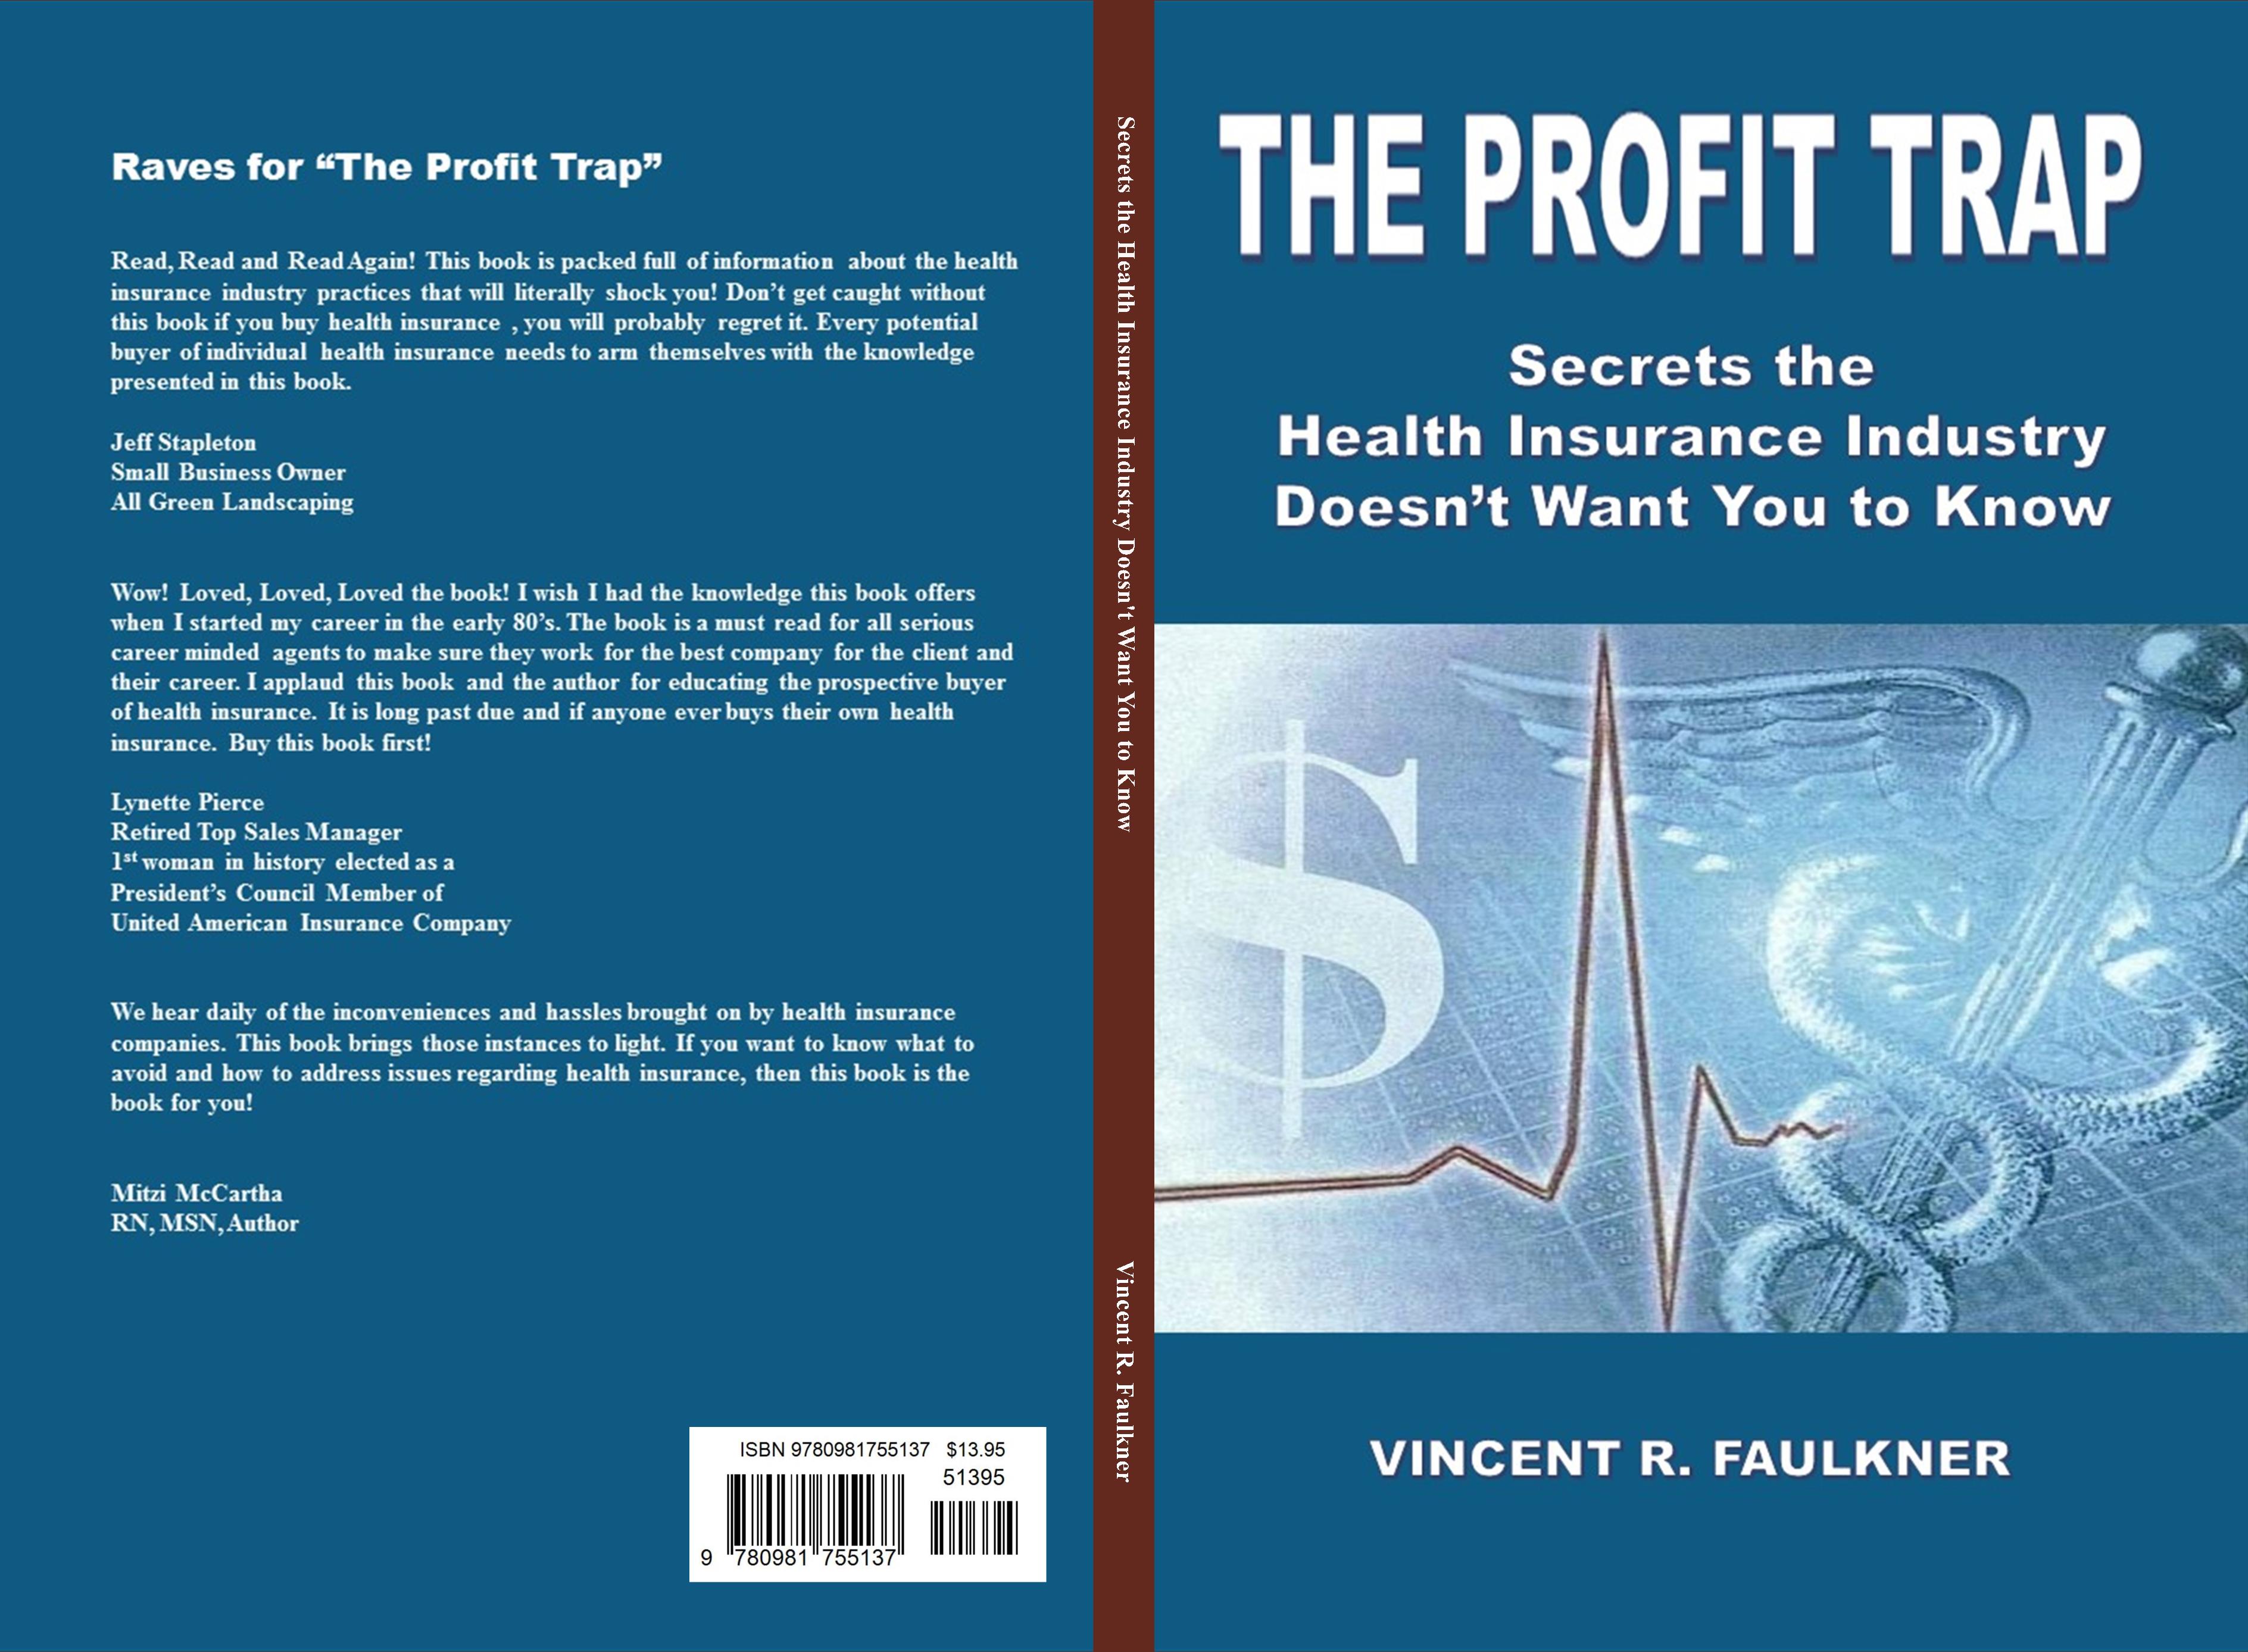 THE PROFIT TRAP  Secrets the Health Insurance Industry Doesn